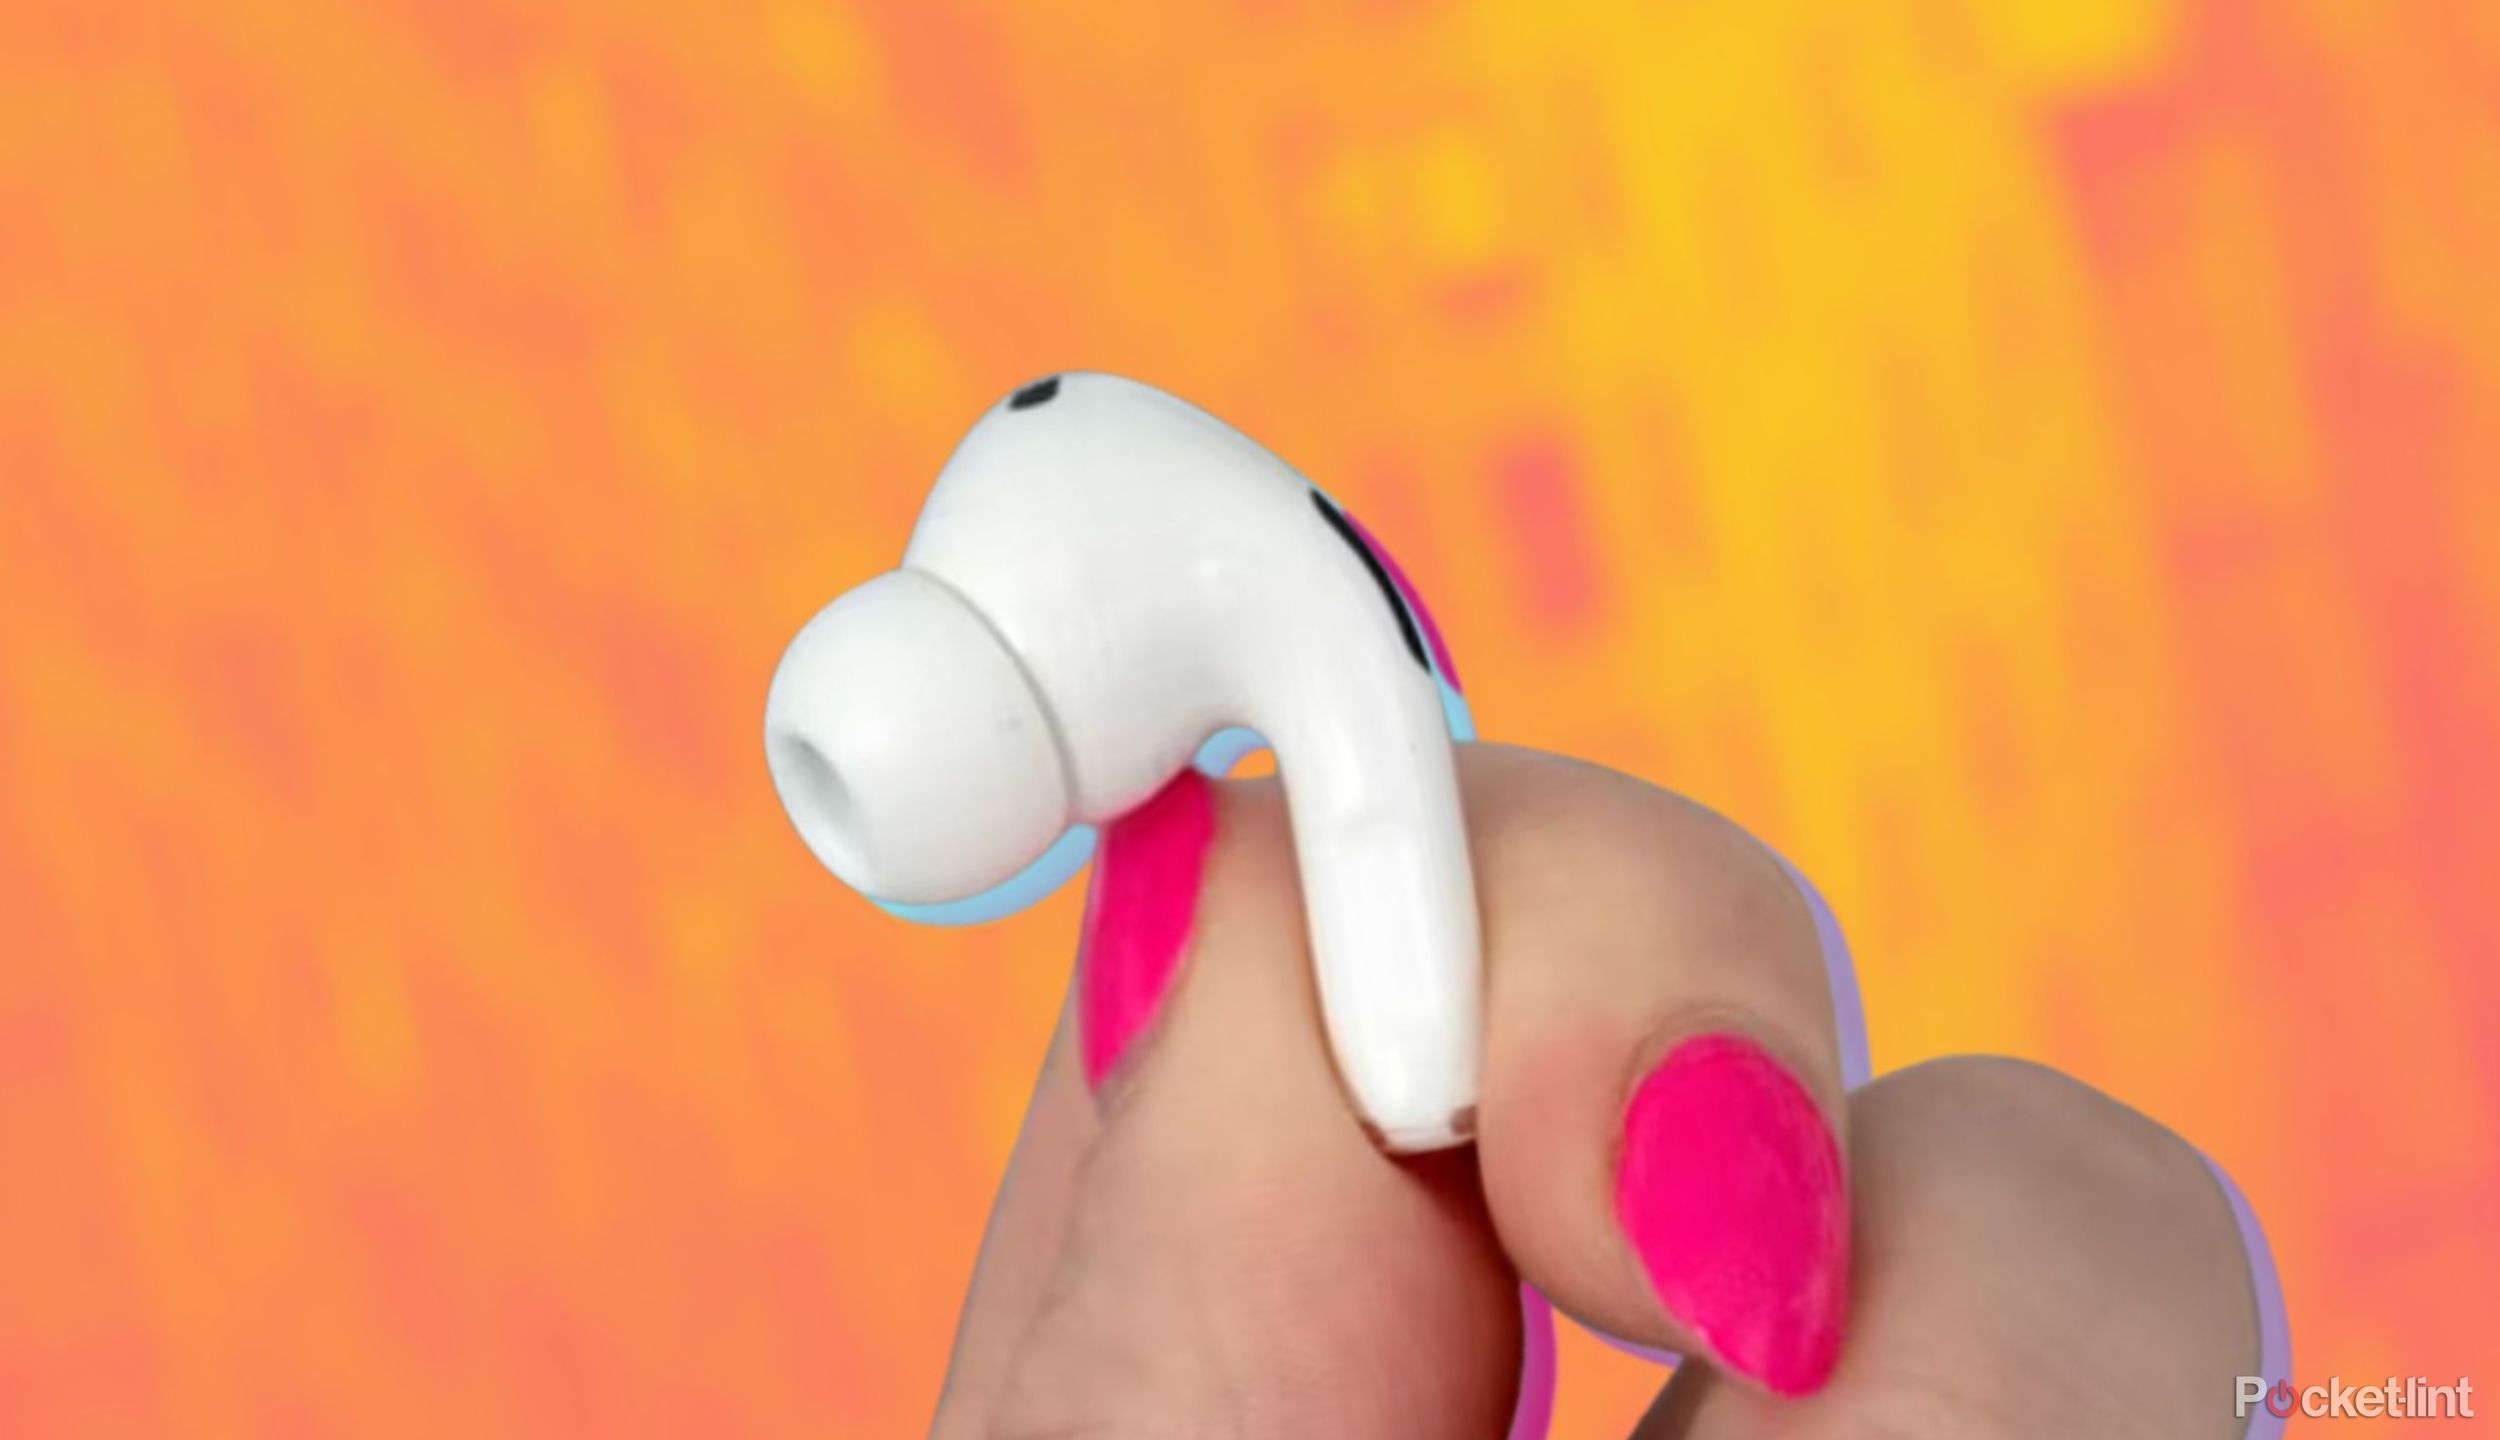 AirPods on sale this Prime Day: Should you buy or wait for a better deal?